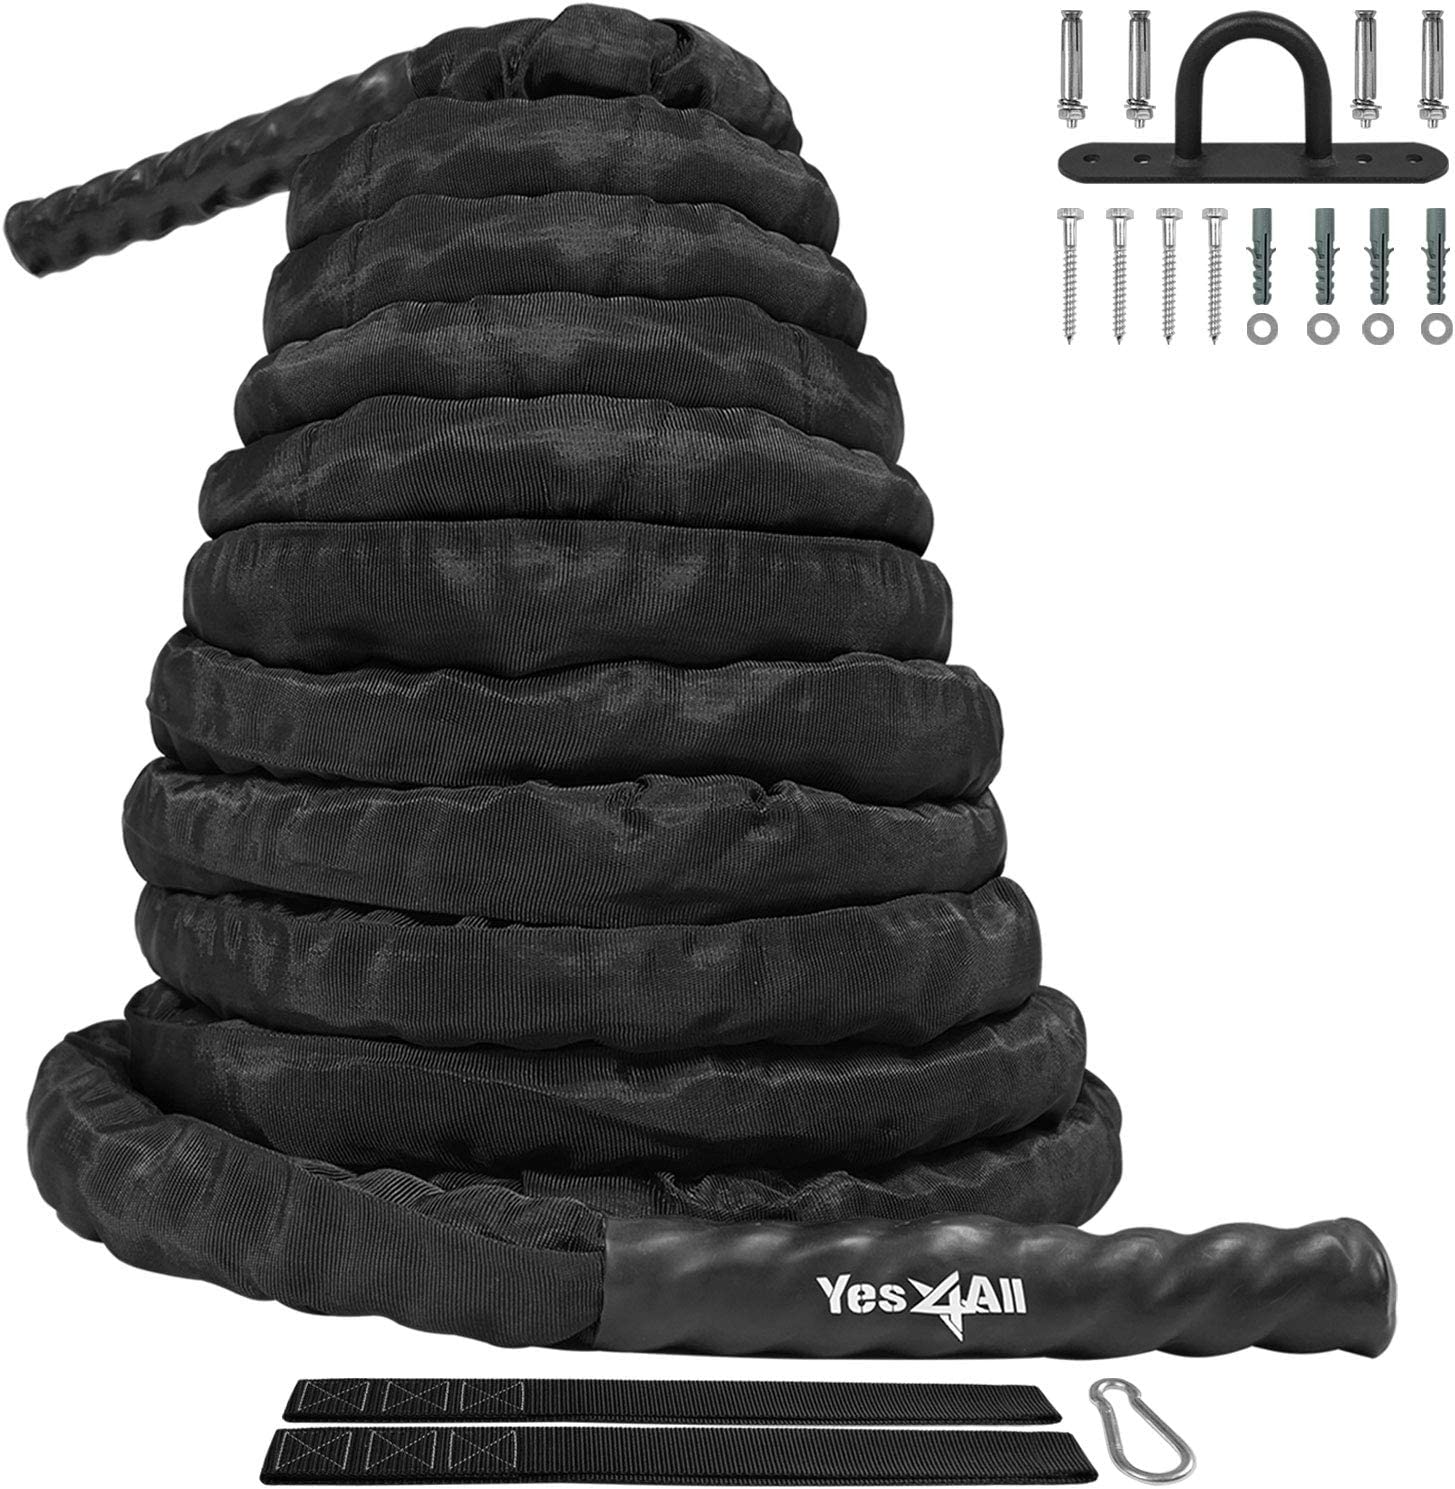 Yes4All 1.5 in Diameter, 30 ft Length, Battle Exercise Training Rope with Protective Cover – Steel Anchor & Strap Included - image 1 of 7